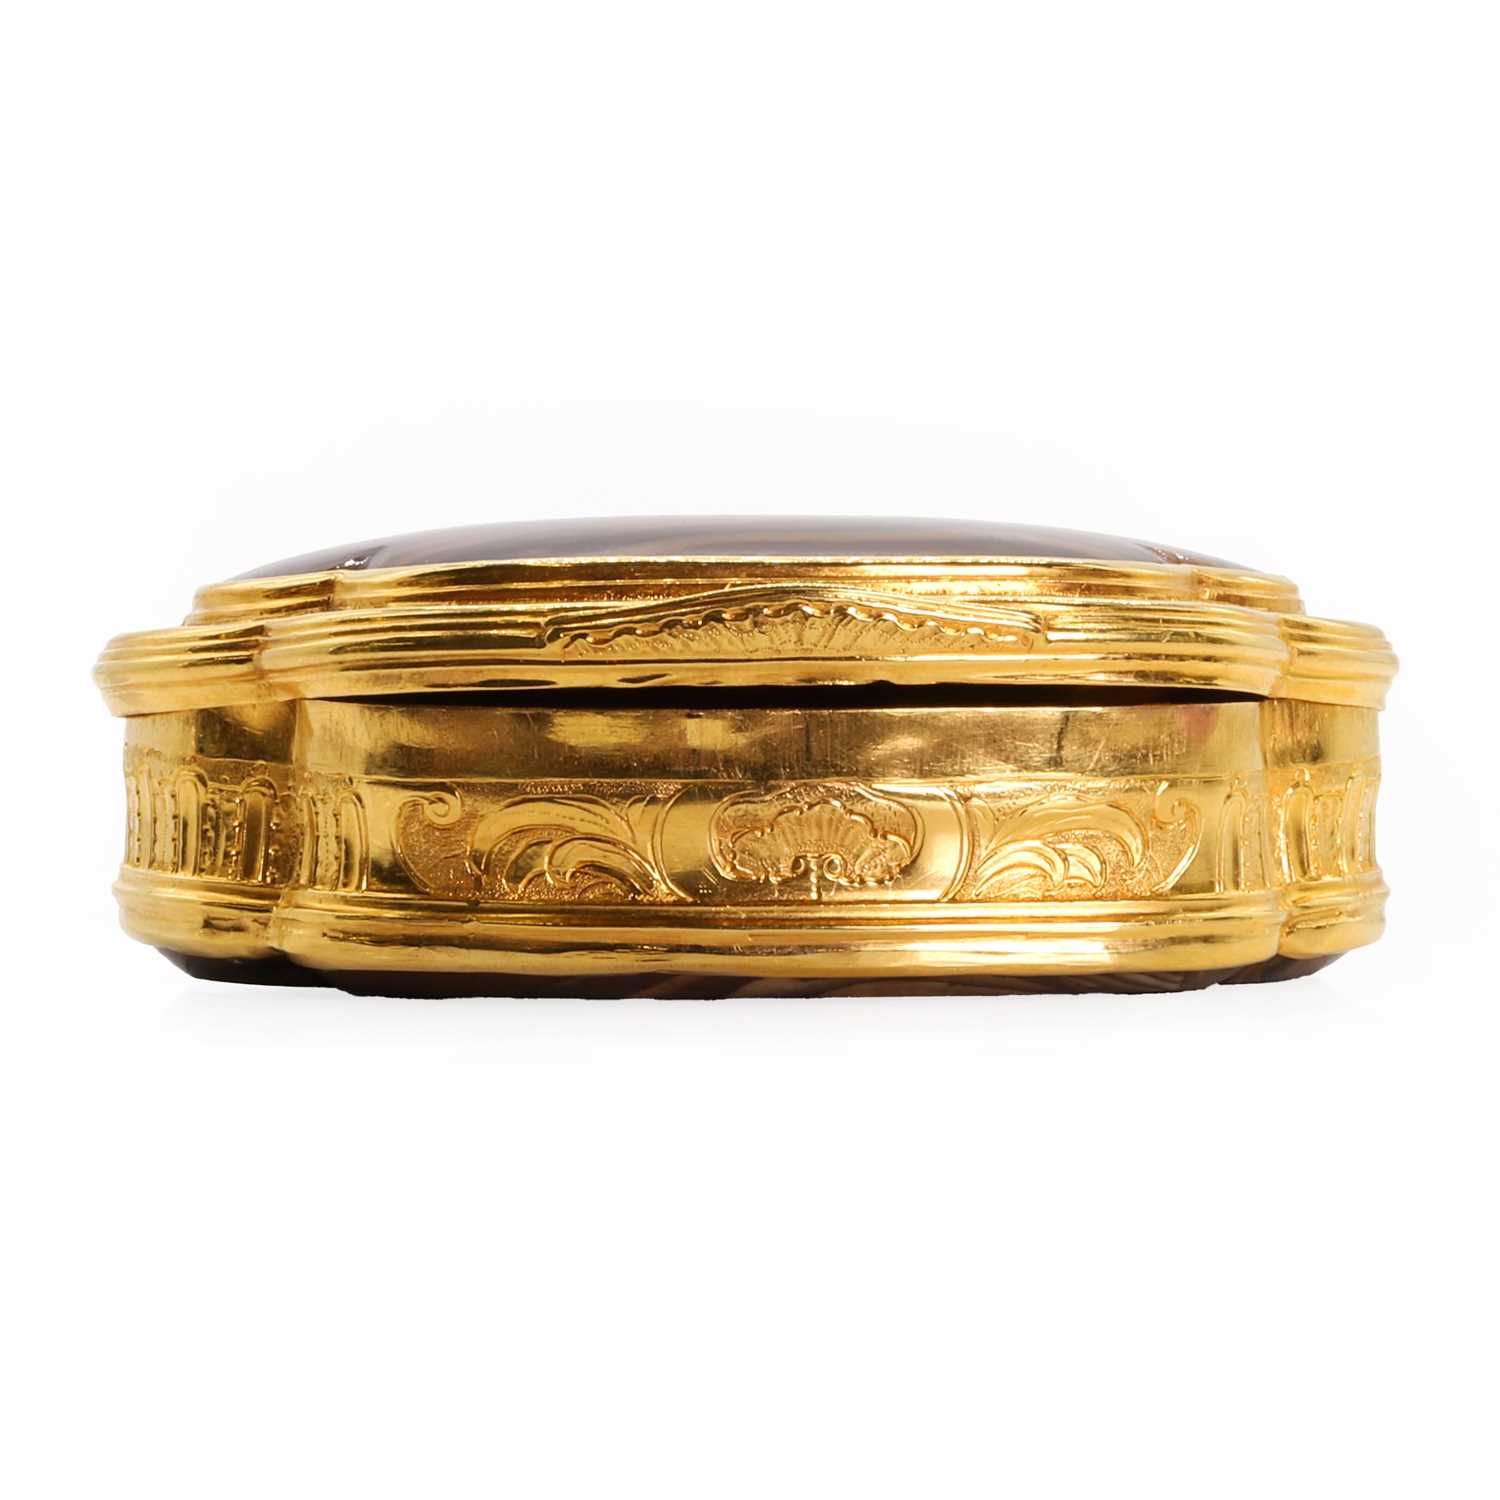 A gold mounted petrified wood snuffbox, late 18th century, - Image 3 of 5